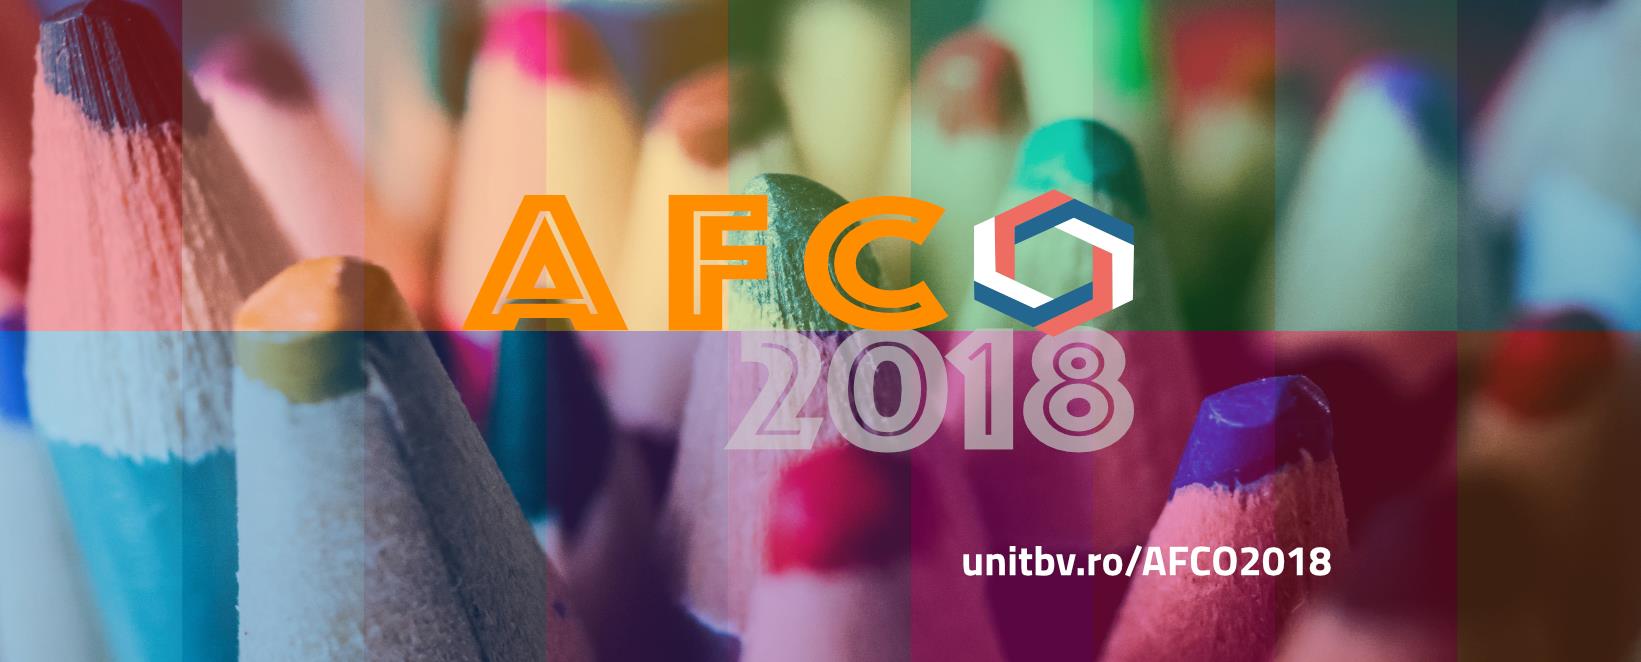 DREAM project will be at afco 2018